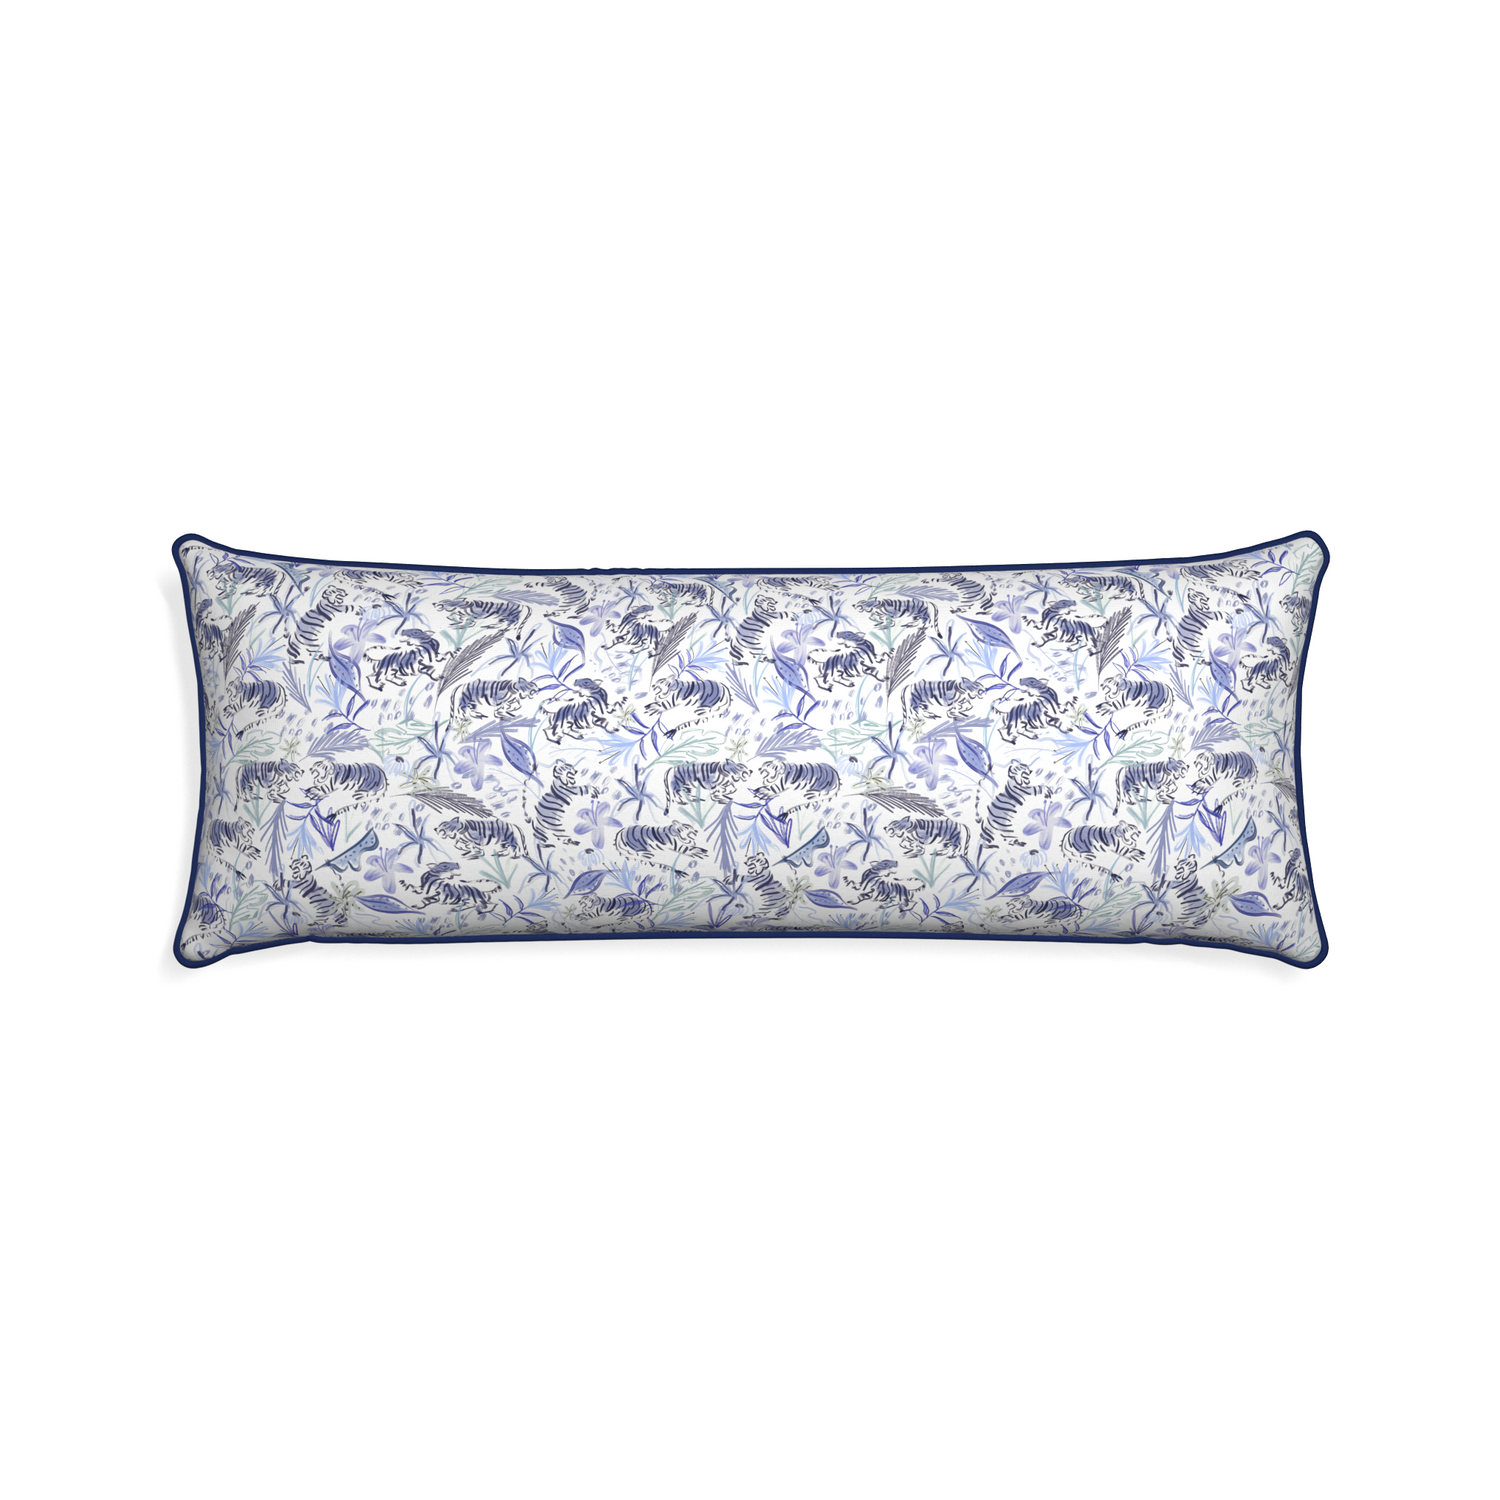 Xl-lumbar frida blue custom blue with intricate tiger designpillow with midnight piping on white background